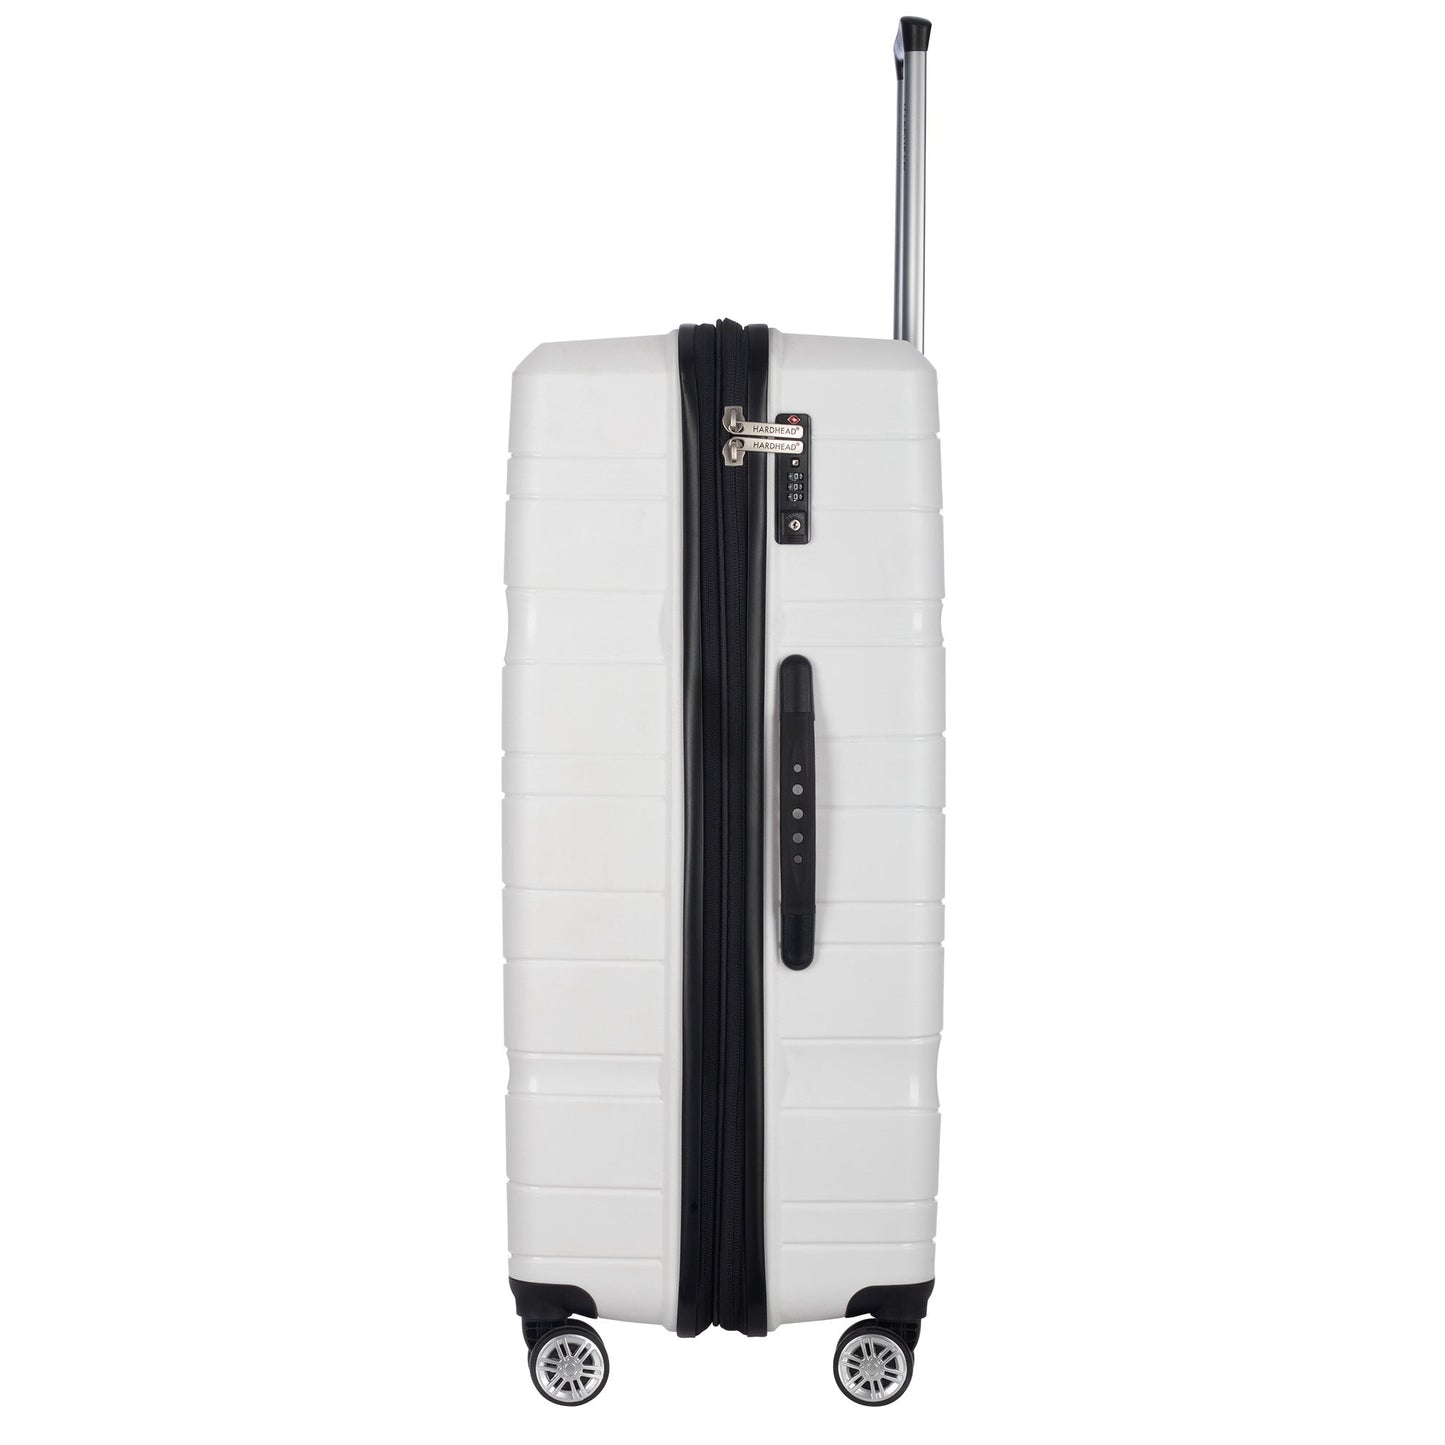 Polyprop Collection White Luggage (21/25/29") Suitcase Lock Spinner Hardshell